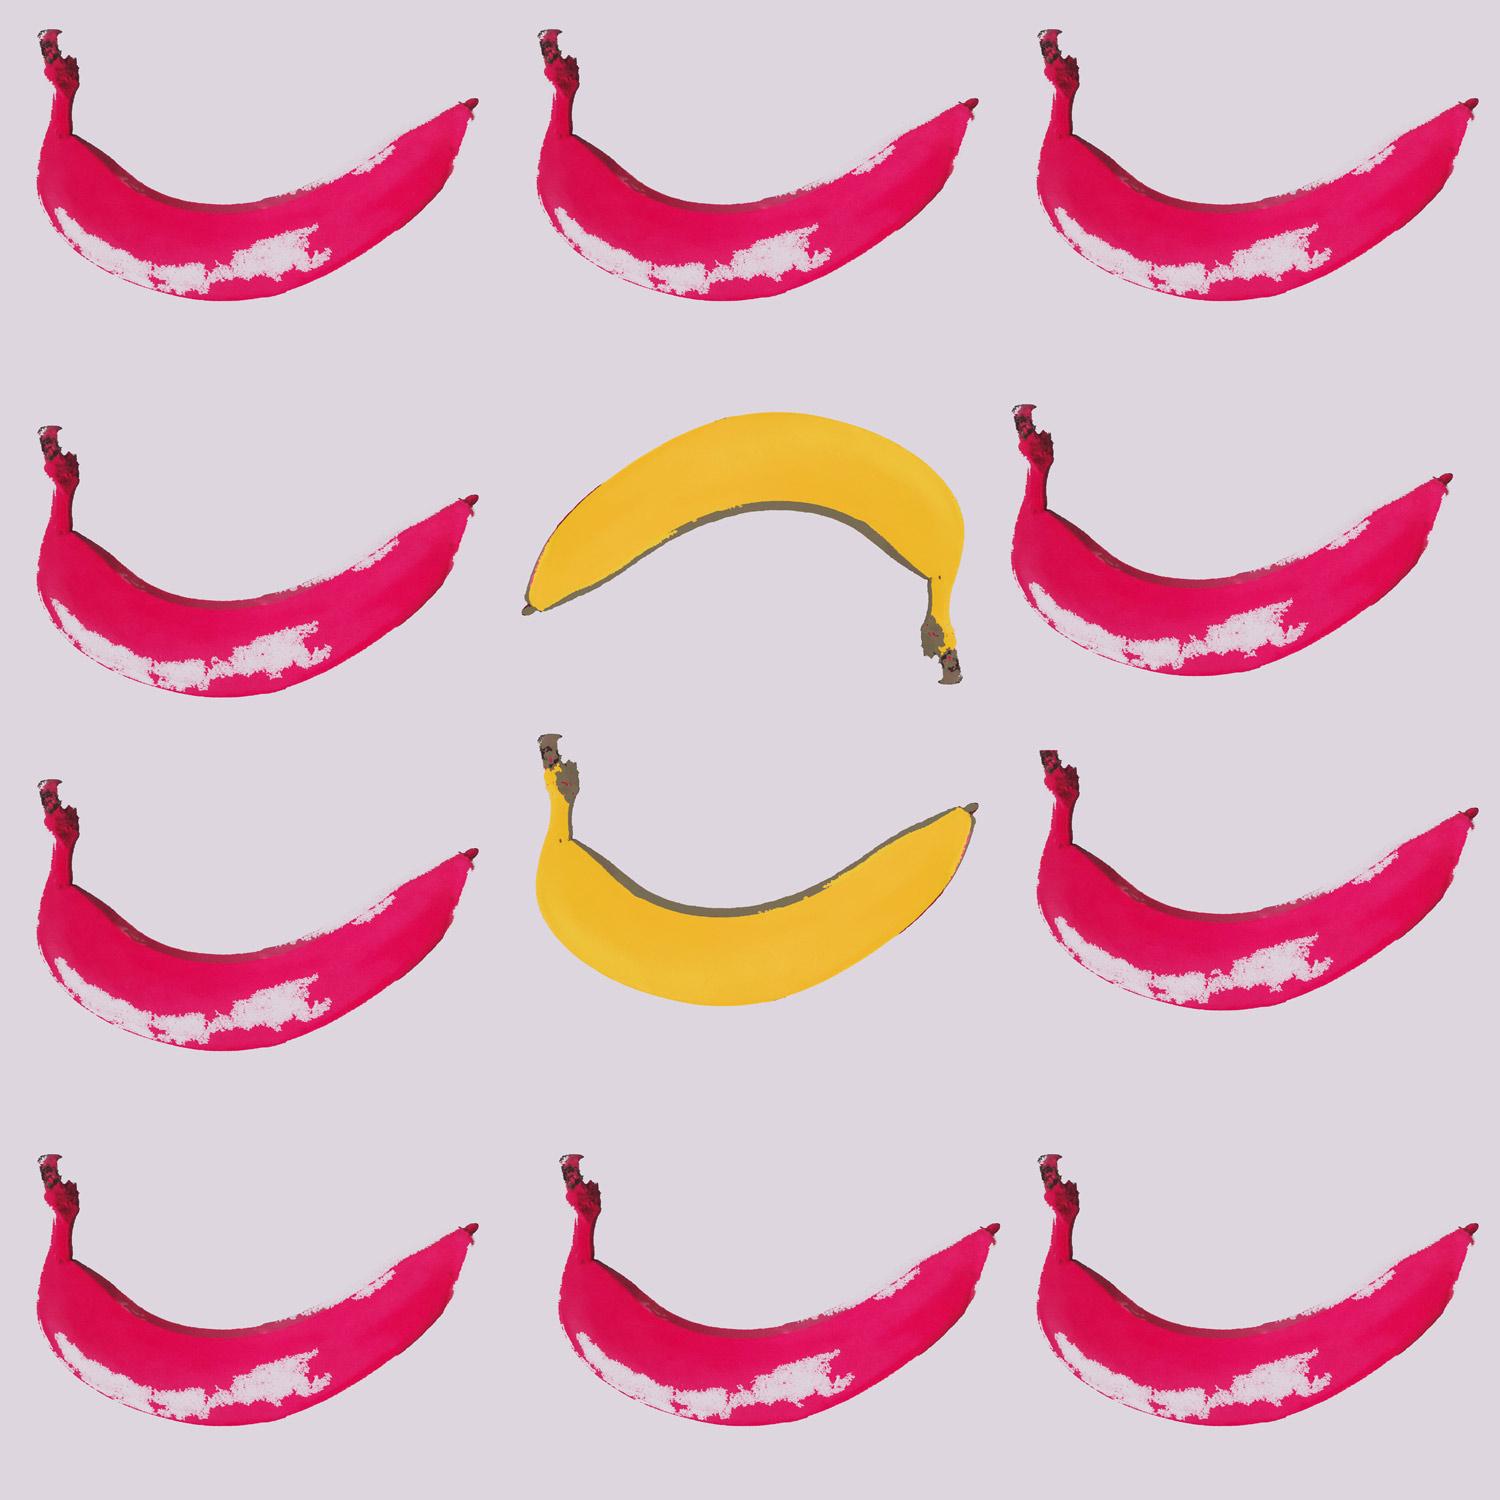 10 Collage of a banana inspired by Andy Warhol motif in pop art style.

C-print on aludi-bond behind acrylic glass (museum quality)

Jochen's work is gaining traction with multiple awards in high-profile photography competitions like Trierenberg